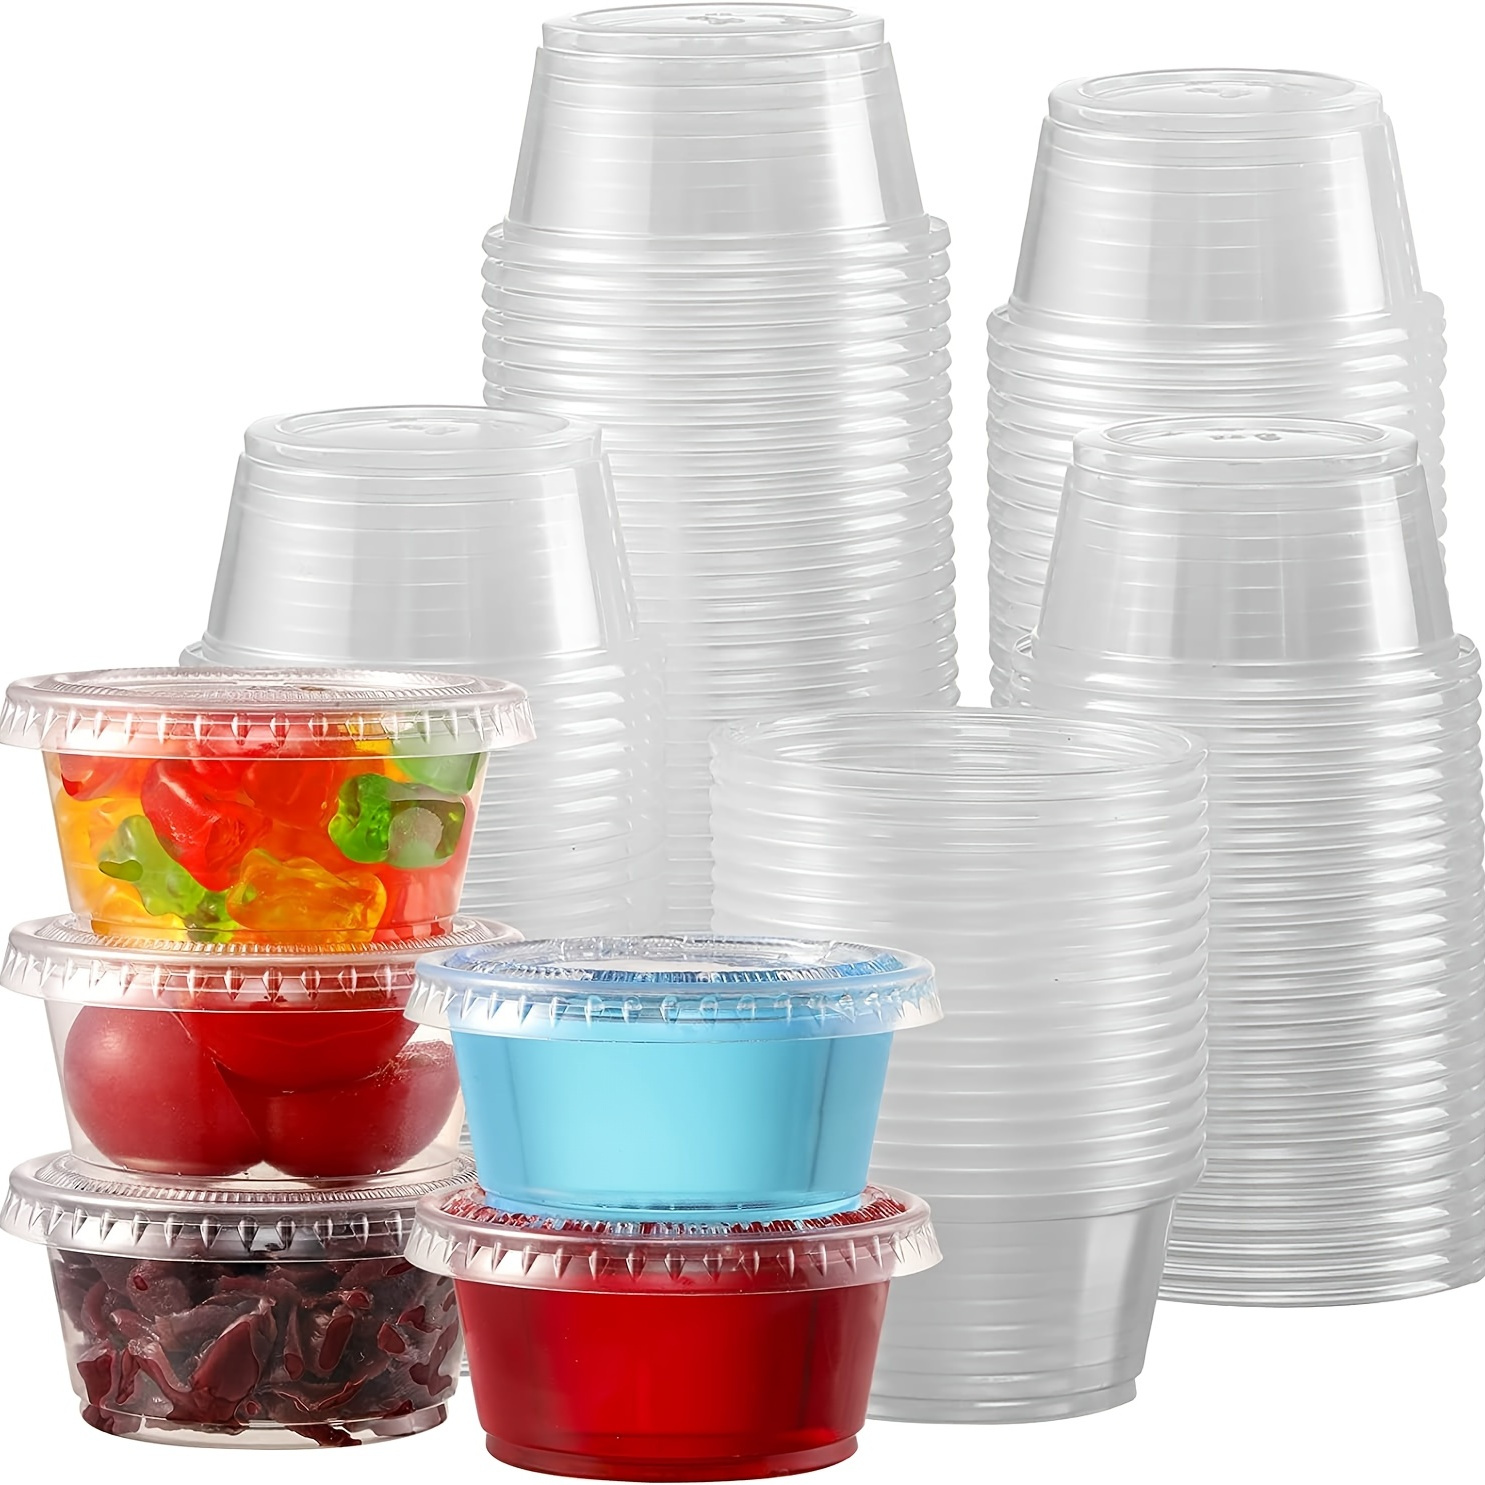 

50pcs Clear Plastic Portion Cups Set With Lids - Perfect For Jelly Shots, Condiments & More!